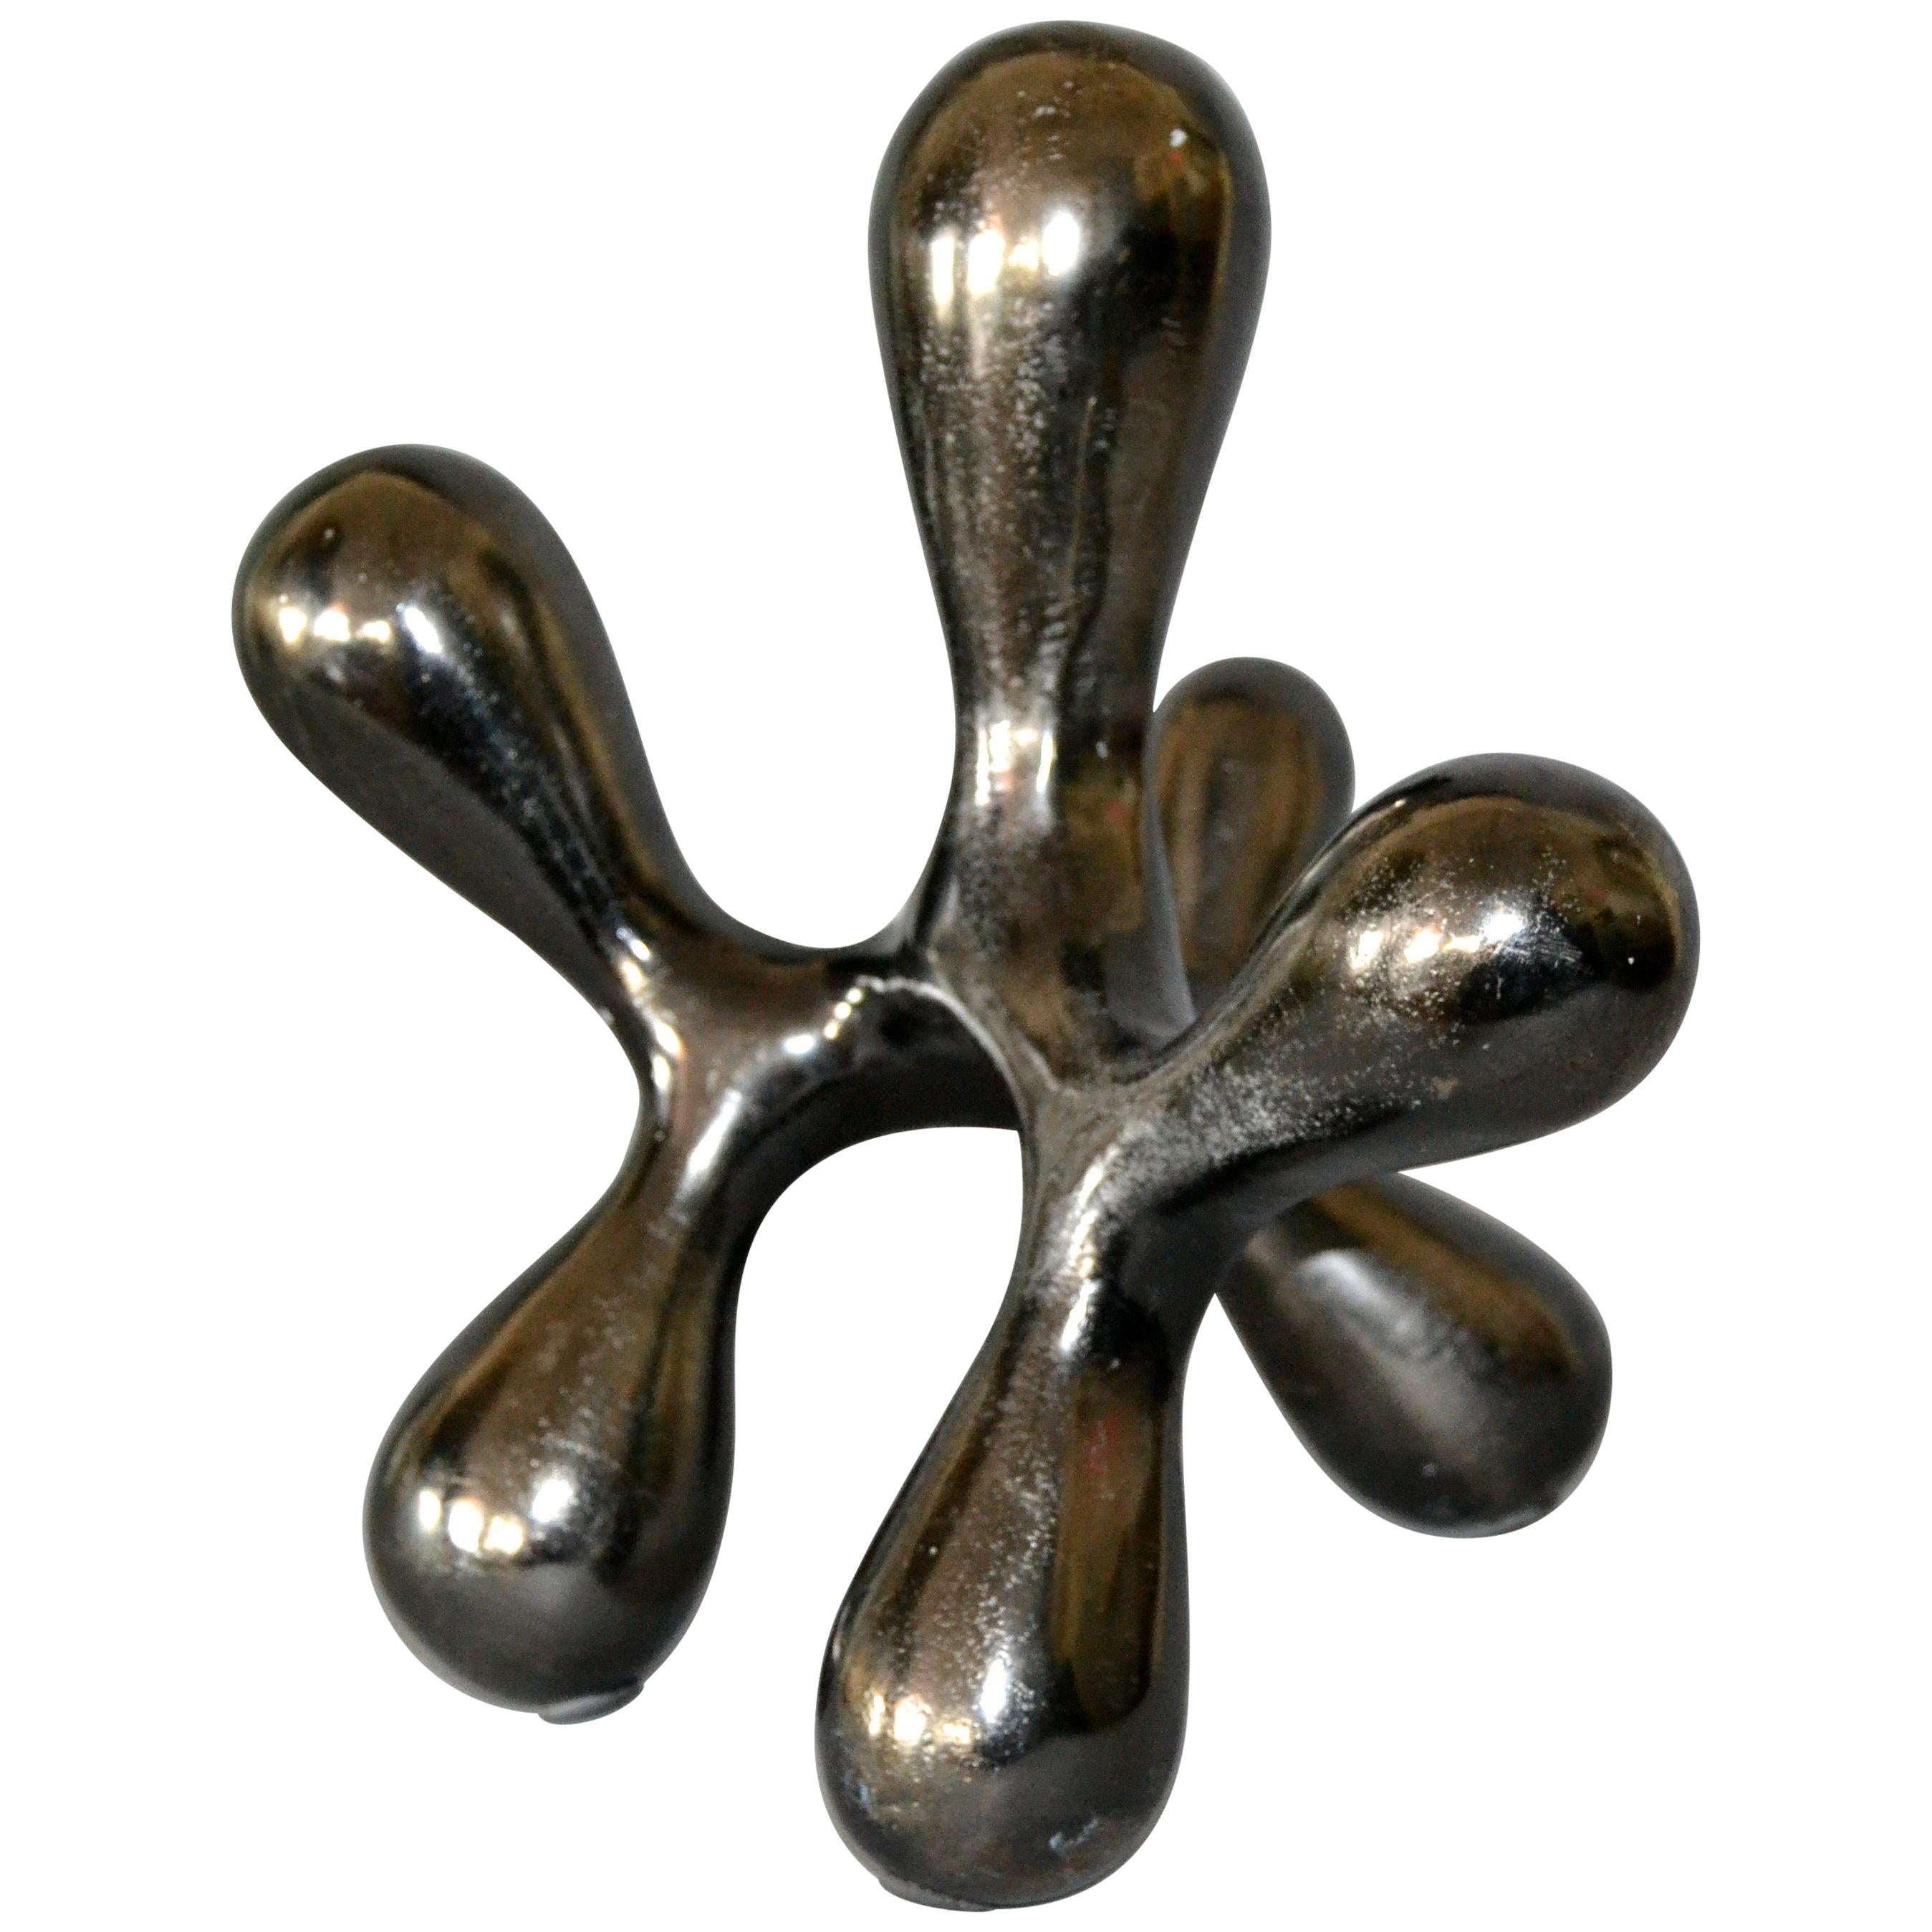 Biomorphic Shape in Abstract Art Bronze Table Sculpture